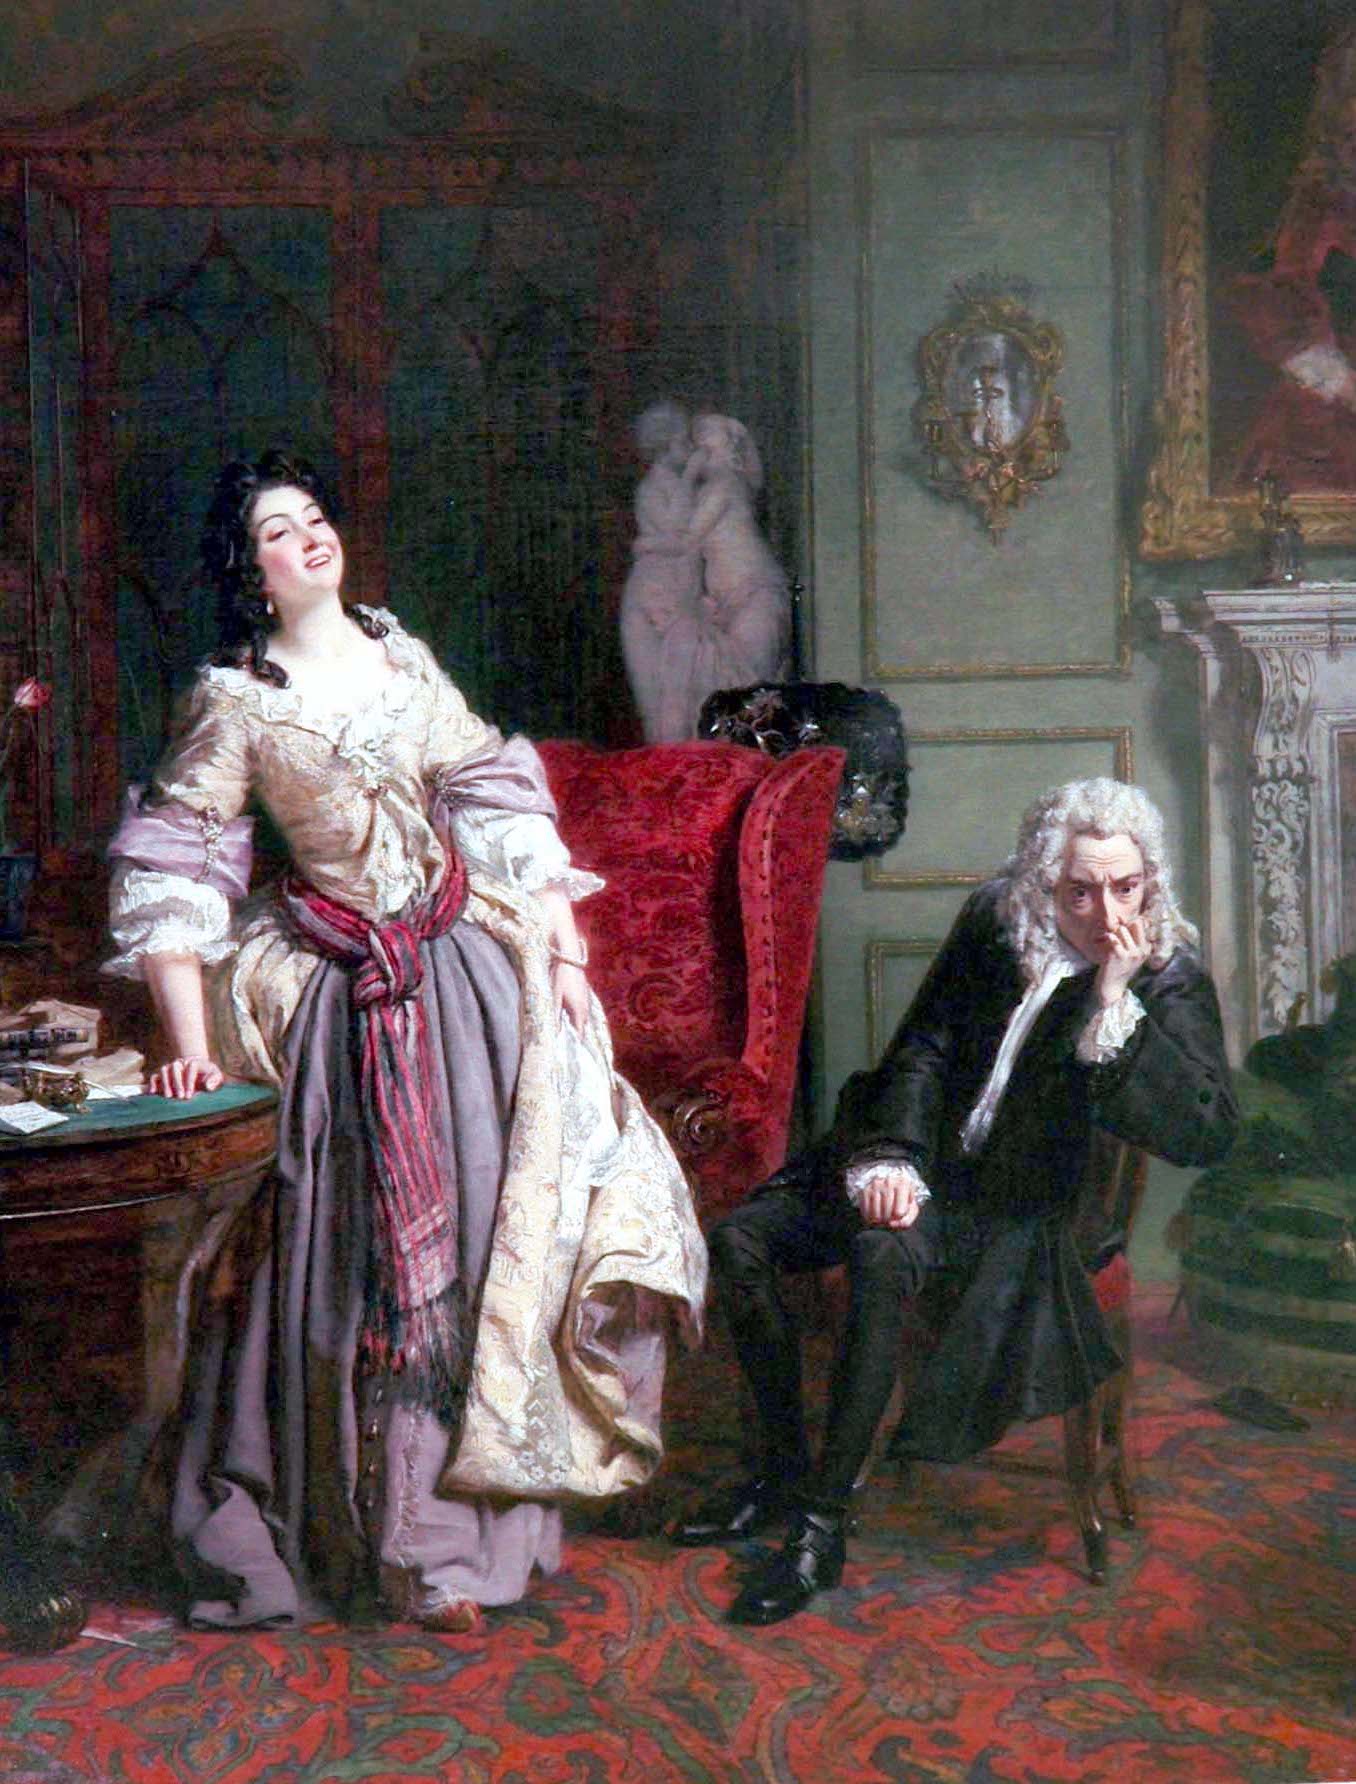 Alexander Pope declared his love to Lady Mary, who responded with laughter. A painting by William Firth